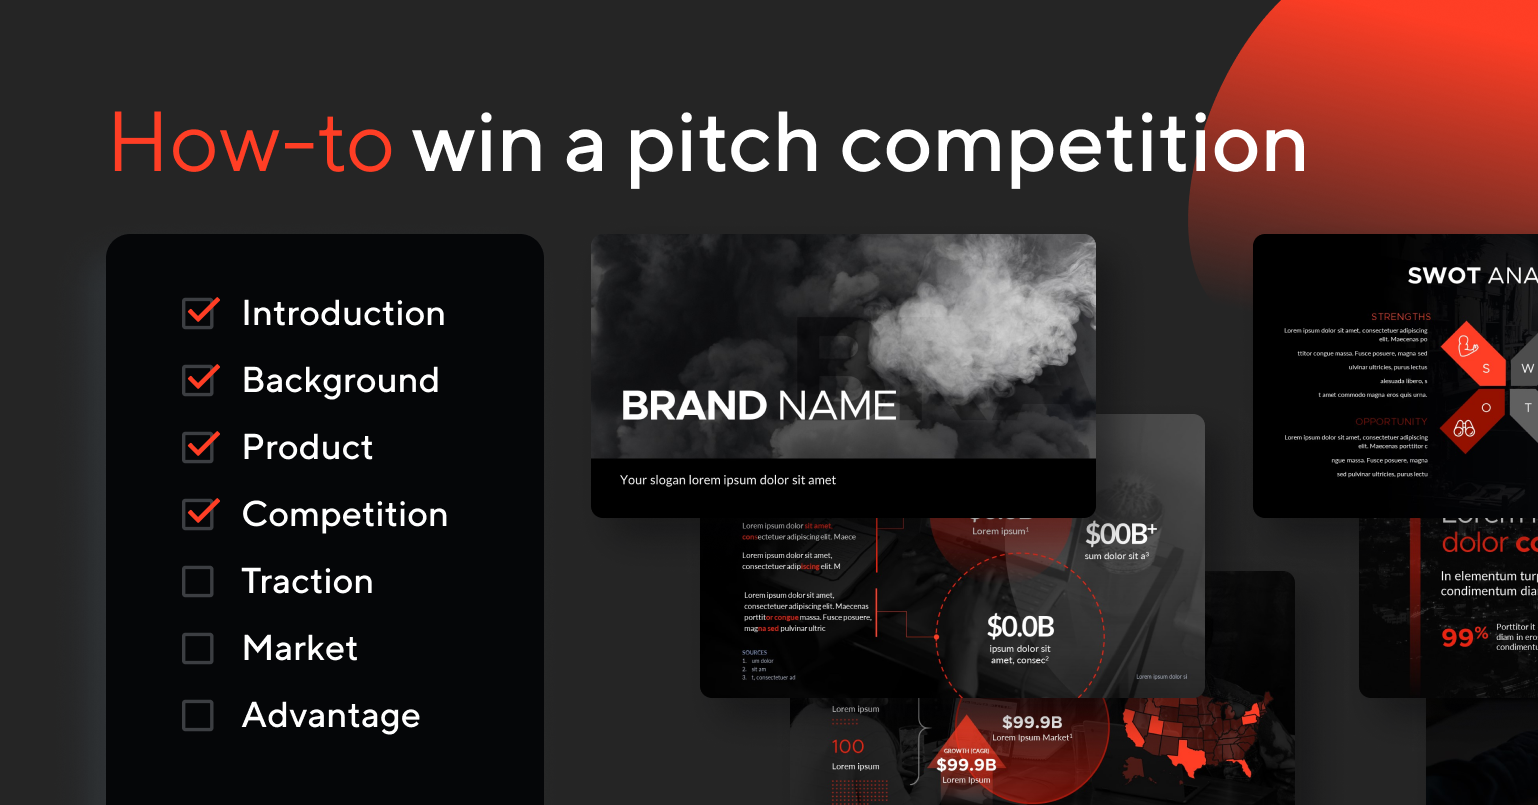 How to win a pitch competition